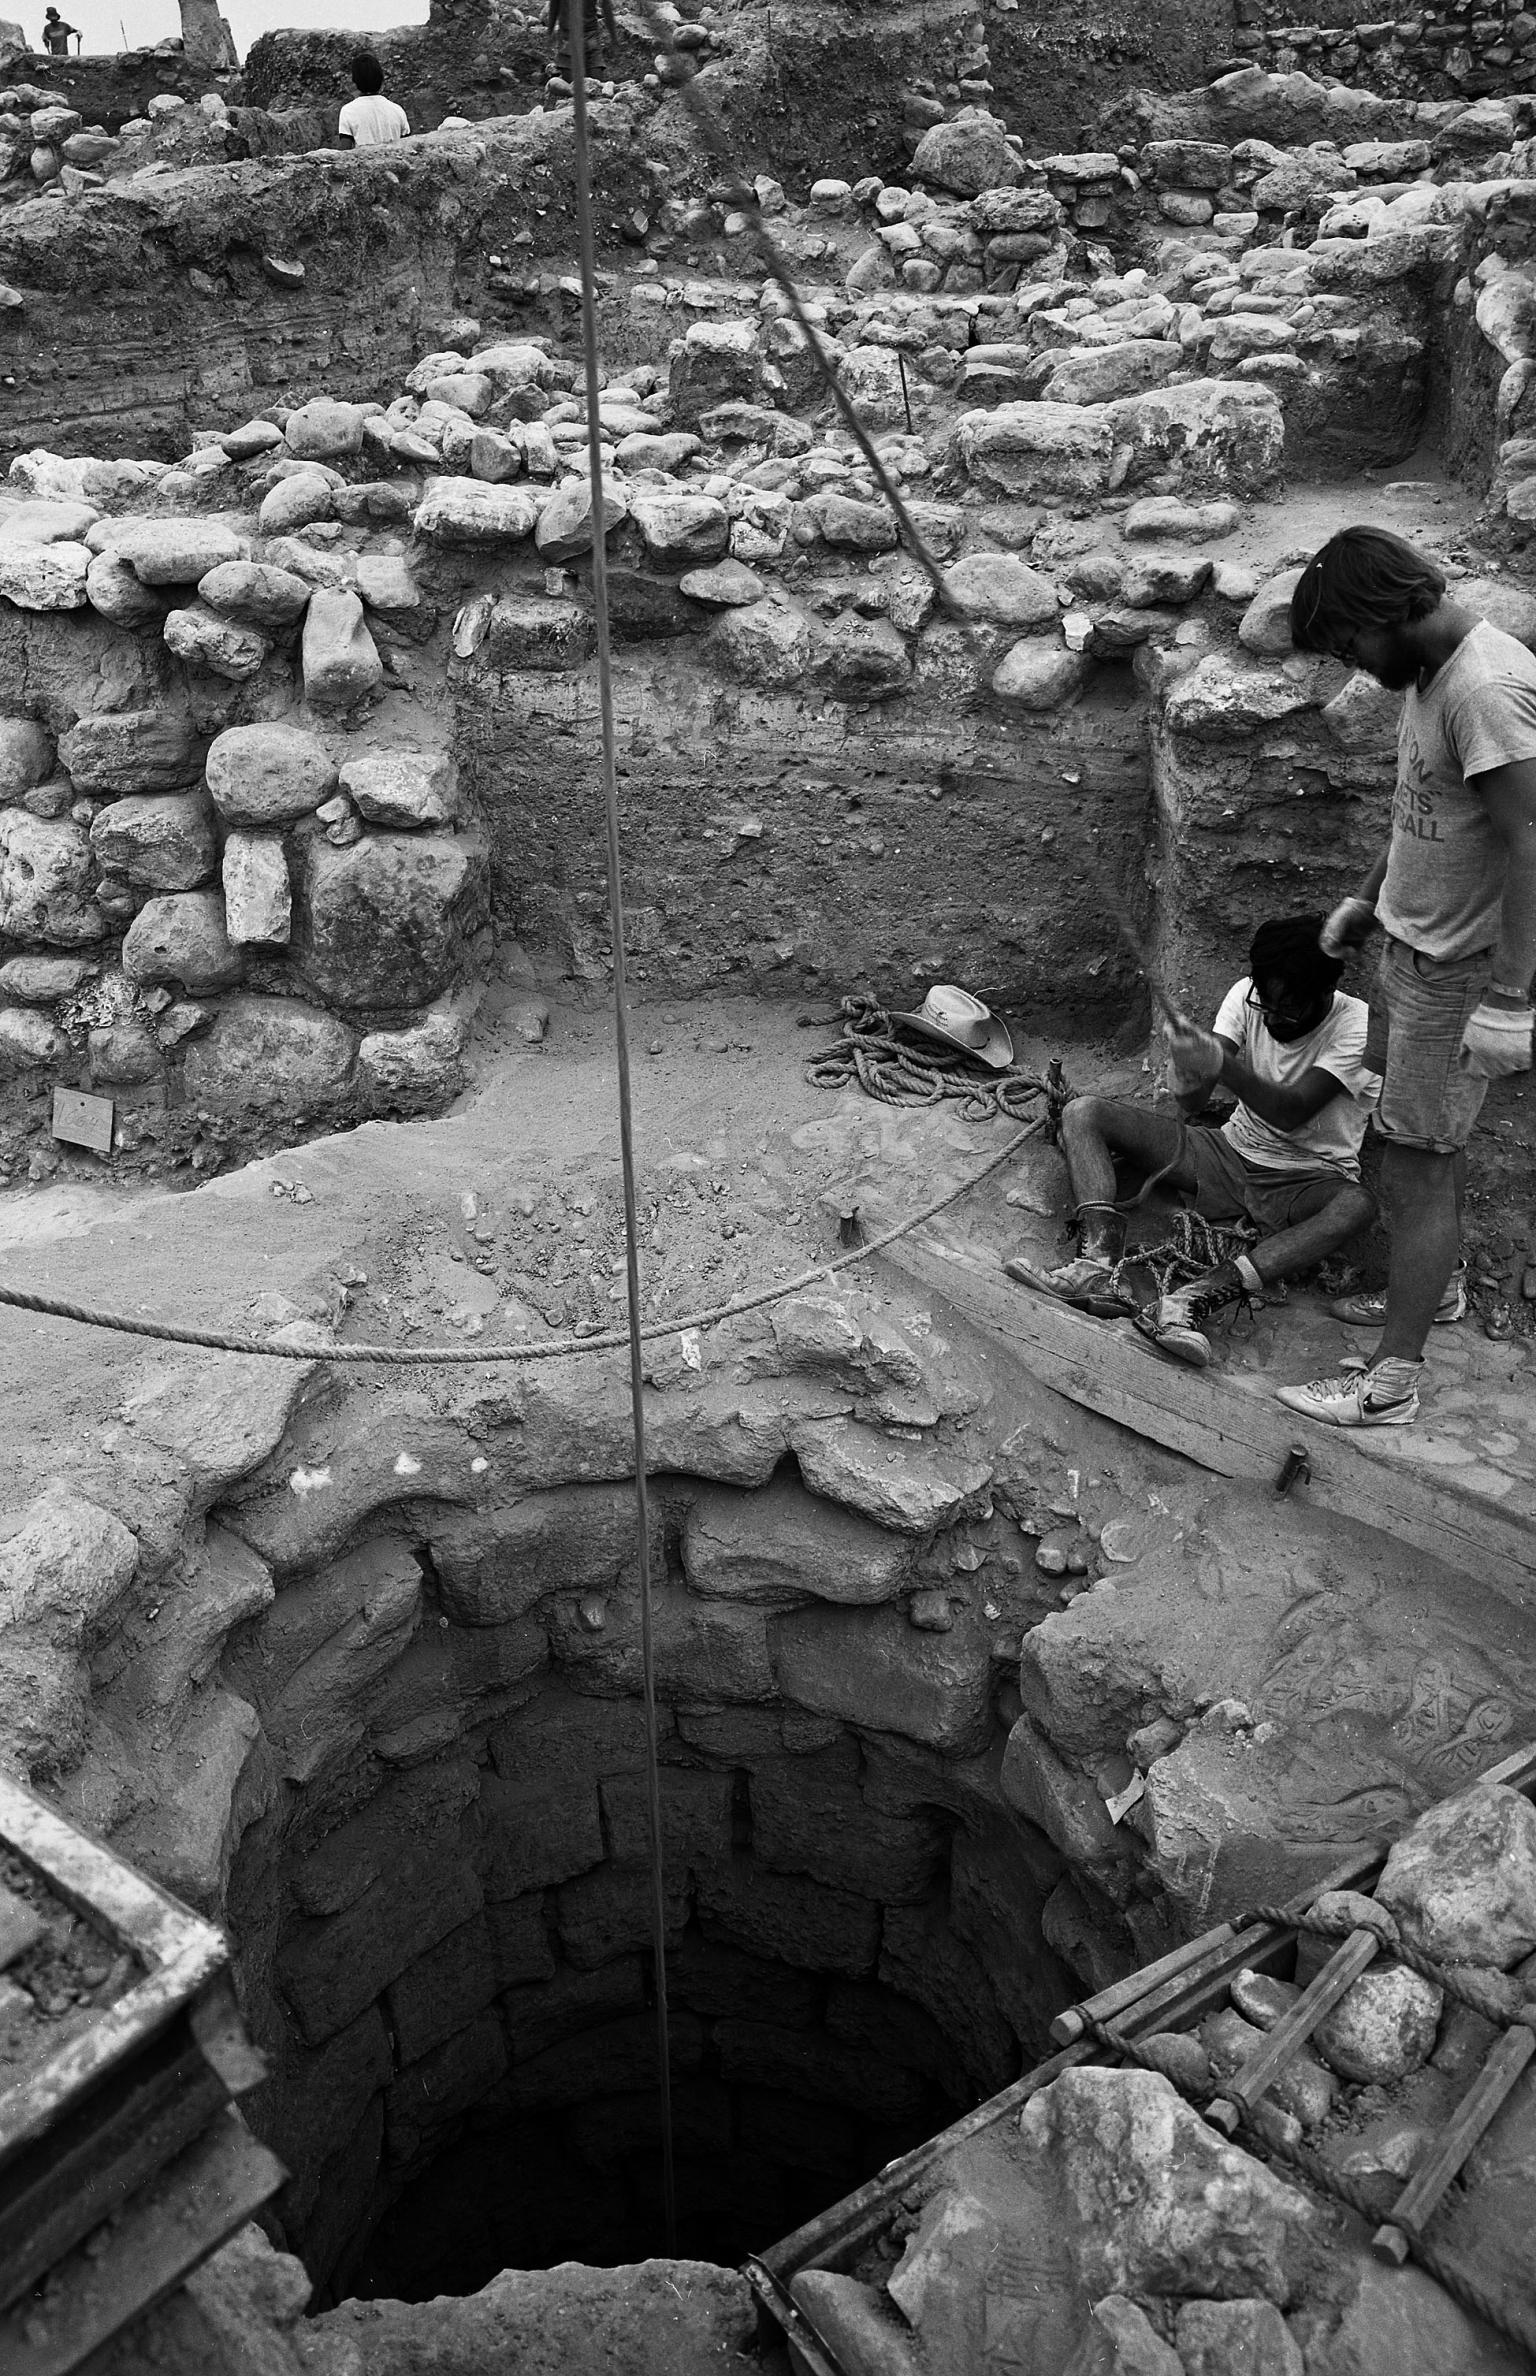 Photograph of stone well with rope system and two figures standing on the side. 